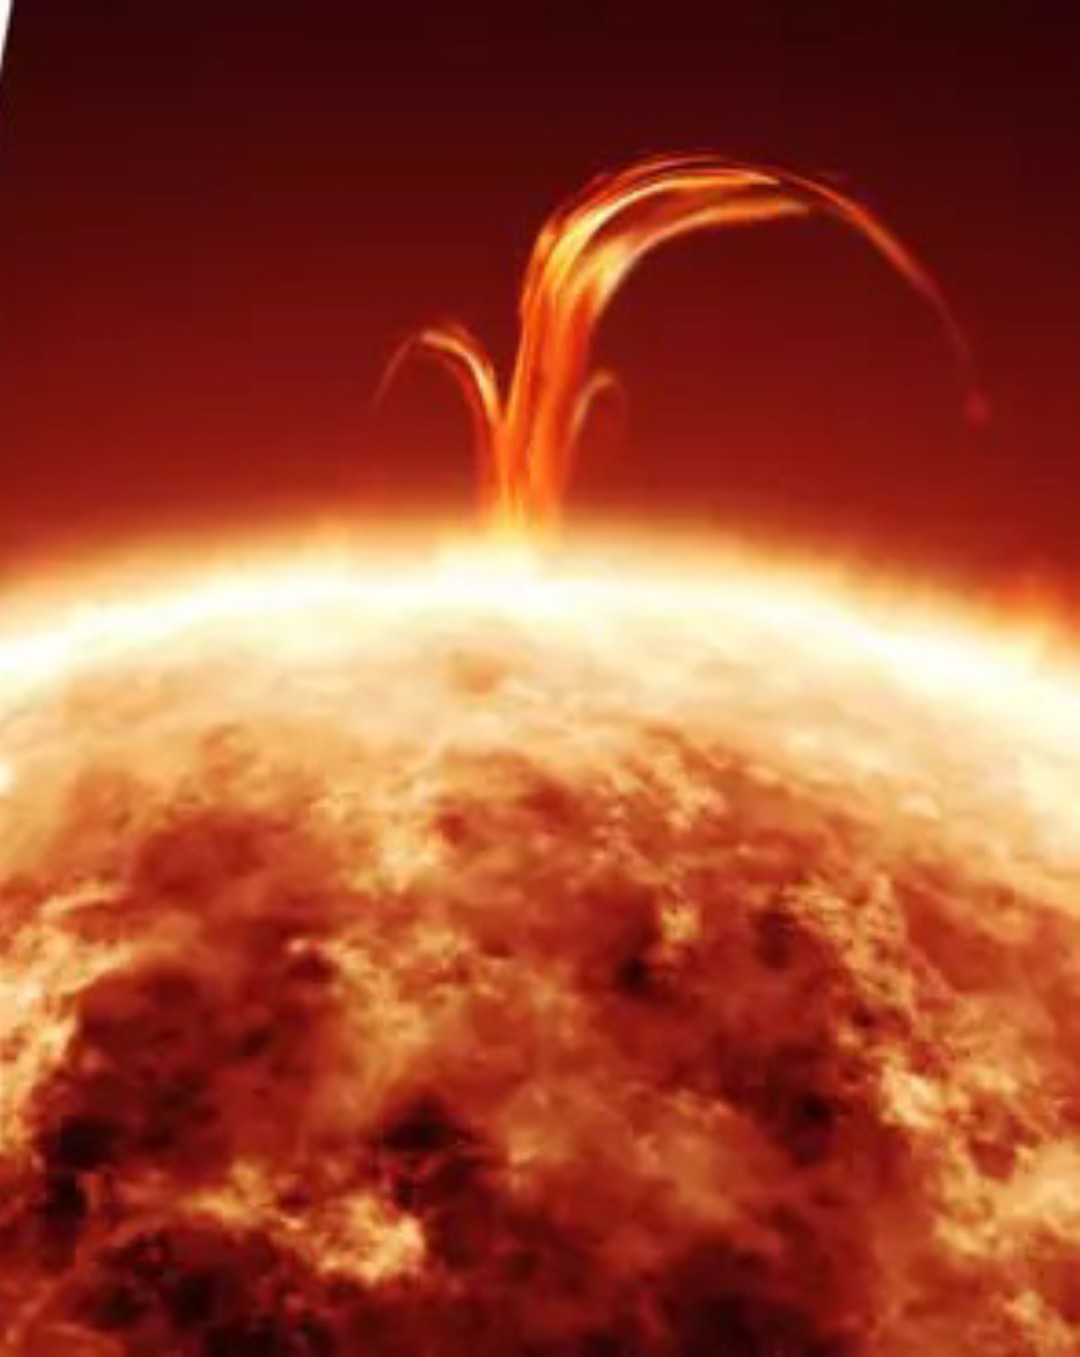 Massive solar storm forecasted to strike Earth that could cause radio and internet blackouts 2